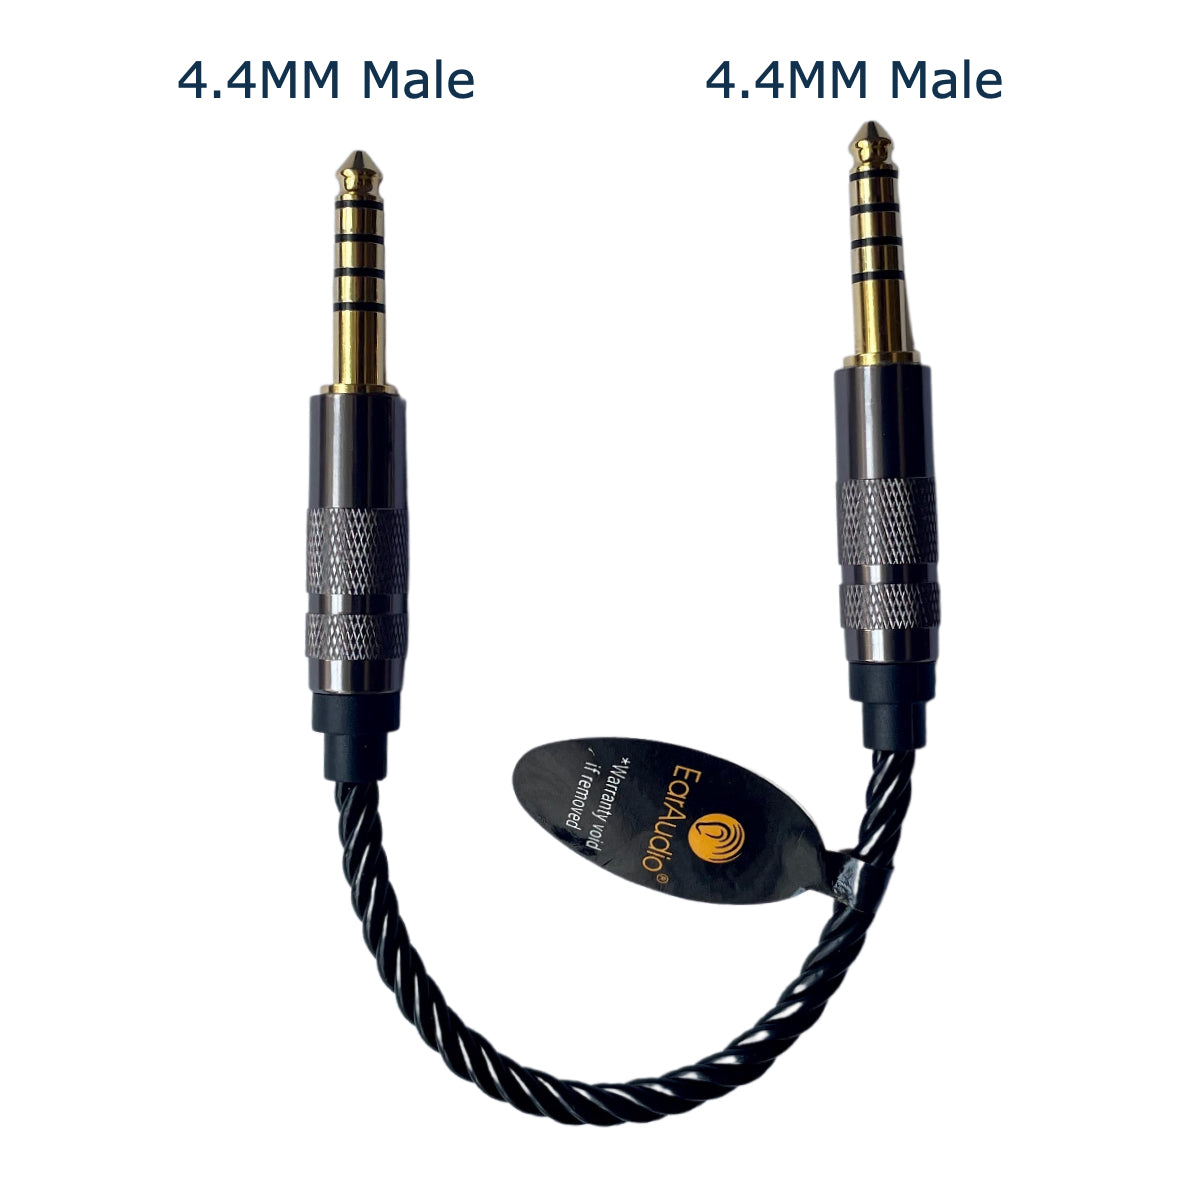 EarAudio 4.4mm Male to 4.4mm Male Interconnect cable